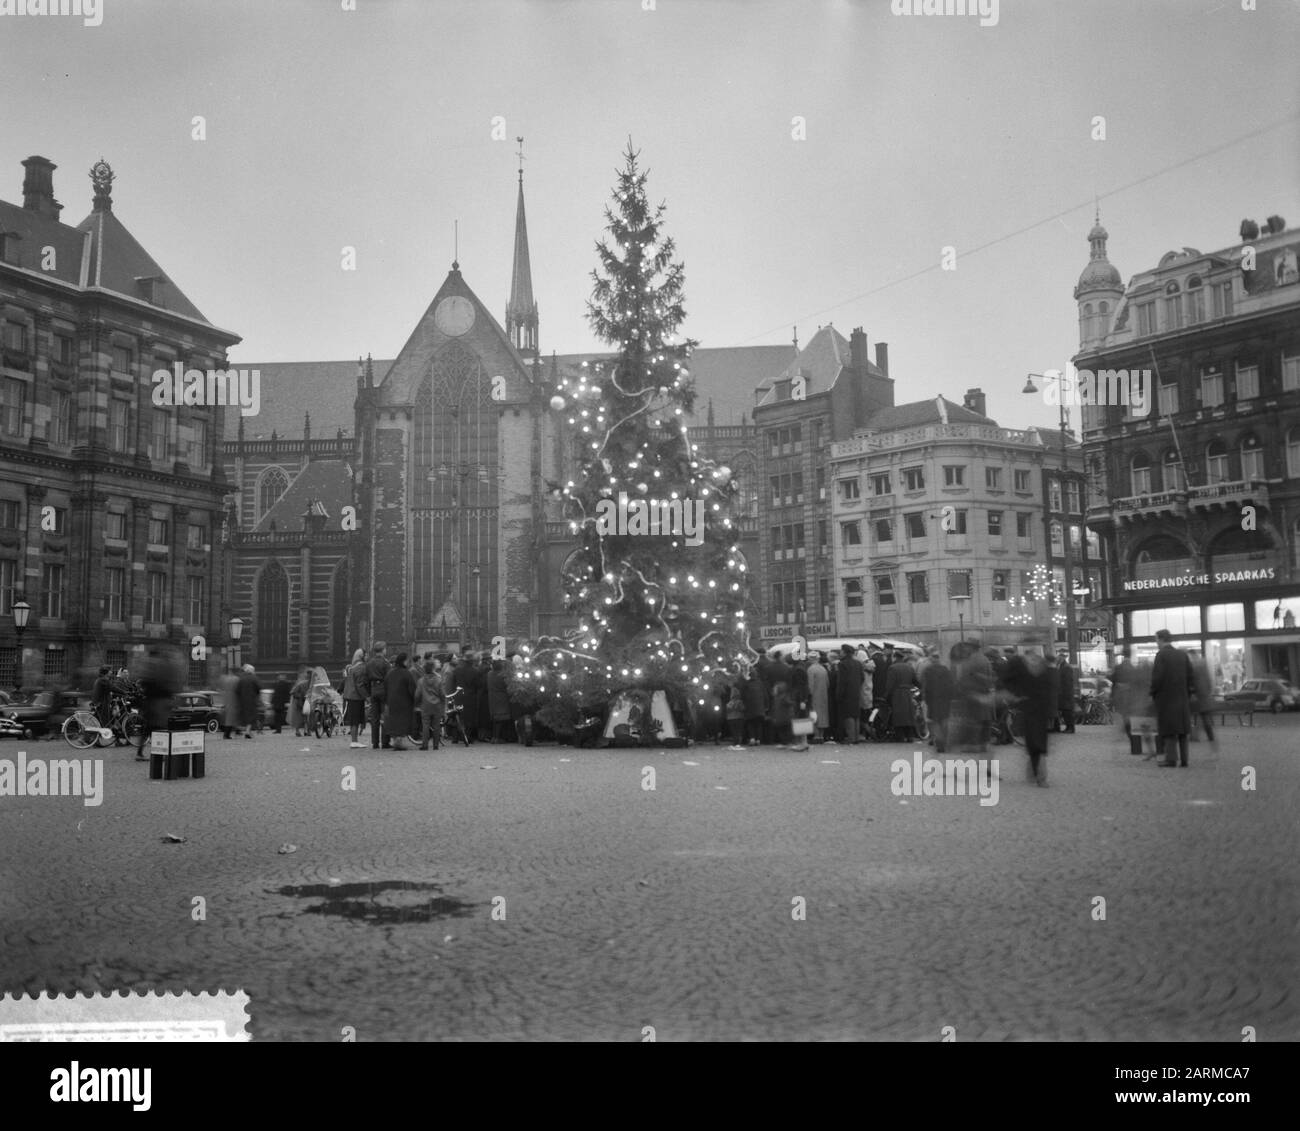 Start of Christmas action of the Salvation Army, illuminated Christmas tree on Dam Date: December 12, 1959 Location: Amsterdam, Noord-Holland Keywords: Christmas campaigns, Christmas trees Institution name: Army des Heils Stock Photo